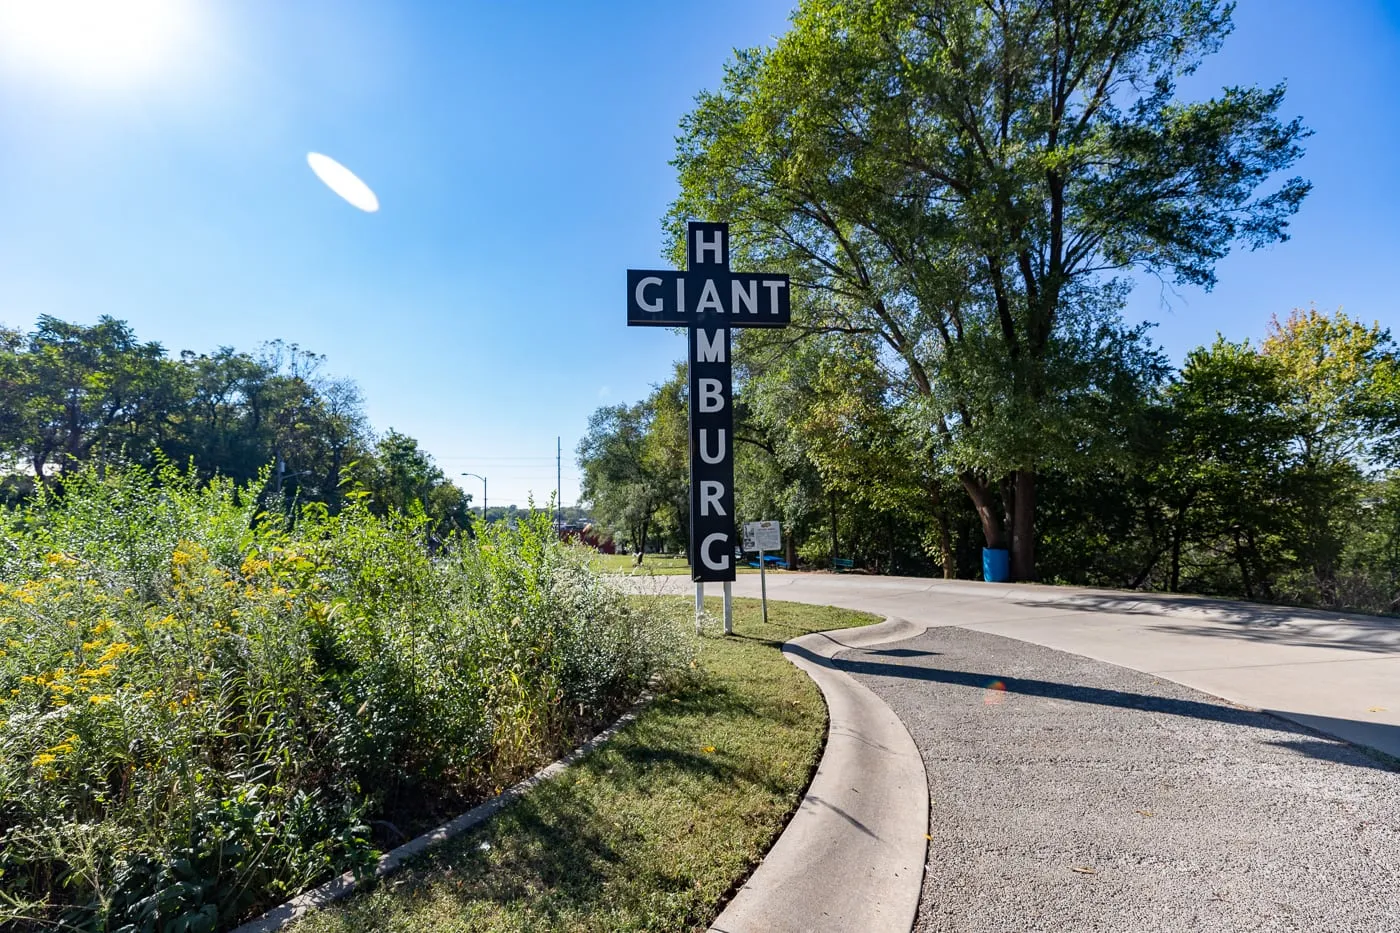 Red's Giant Hamburg sign at the Birthplace of Route 66 Roadside Park in Springfield, Missouri